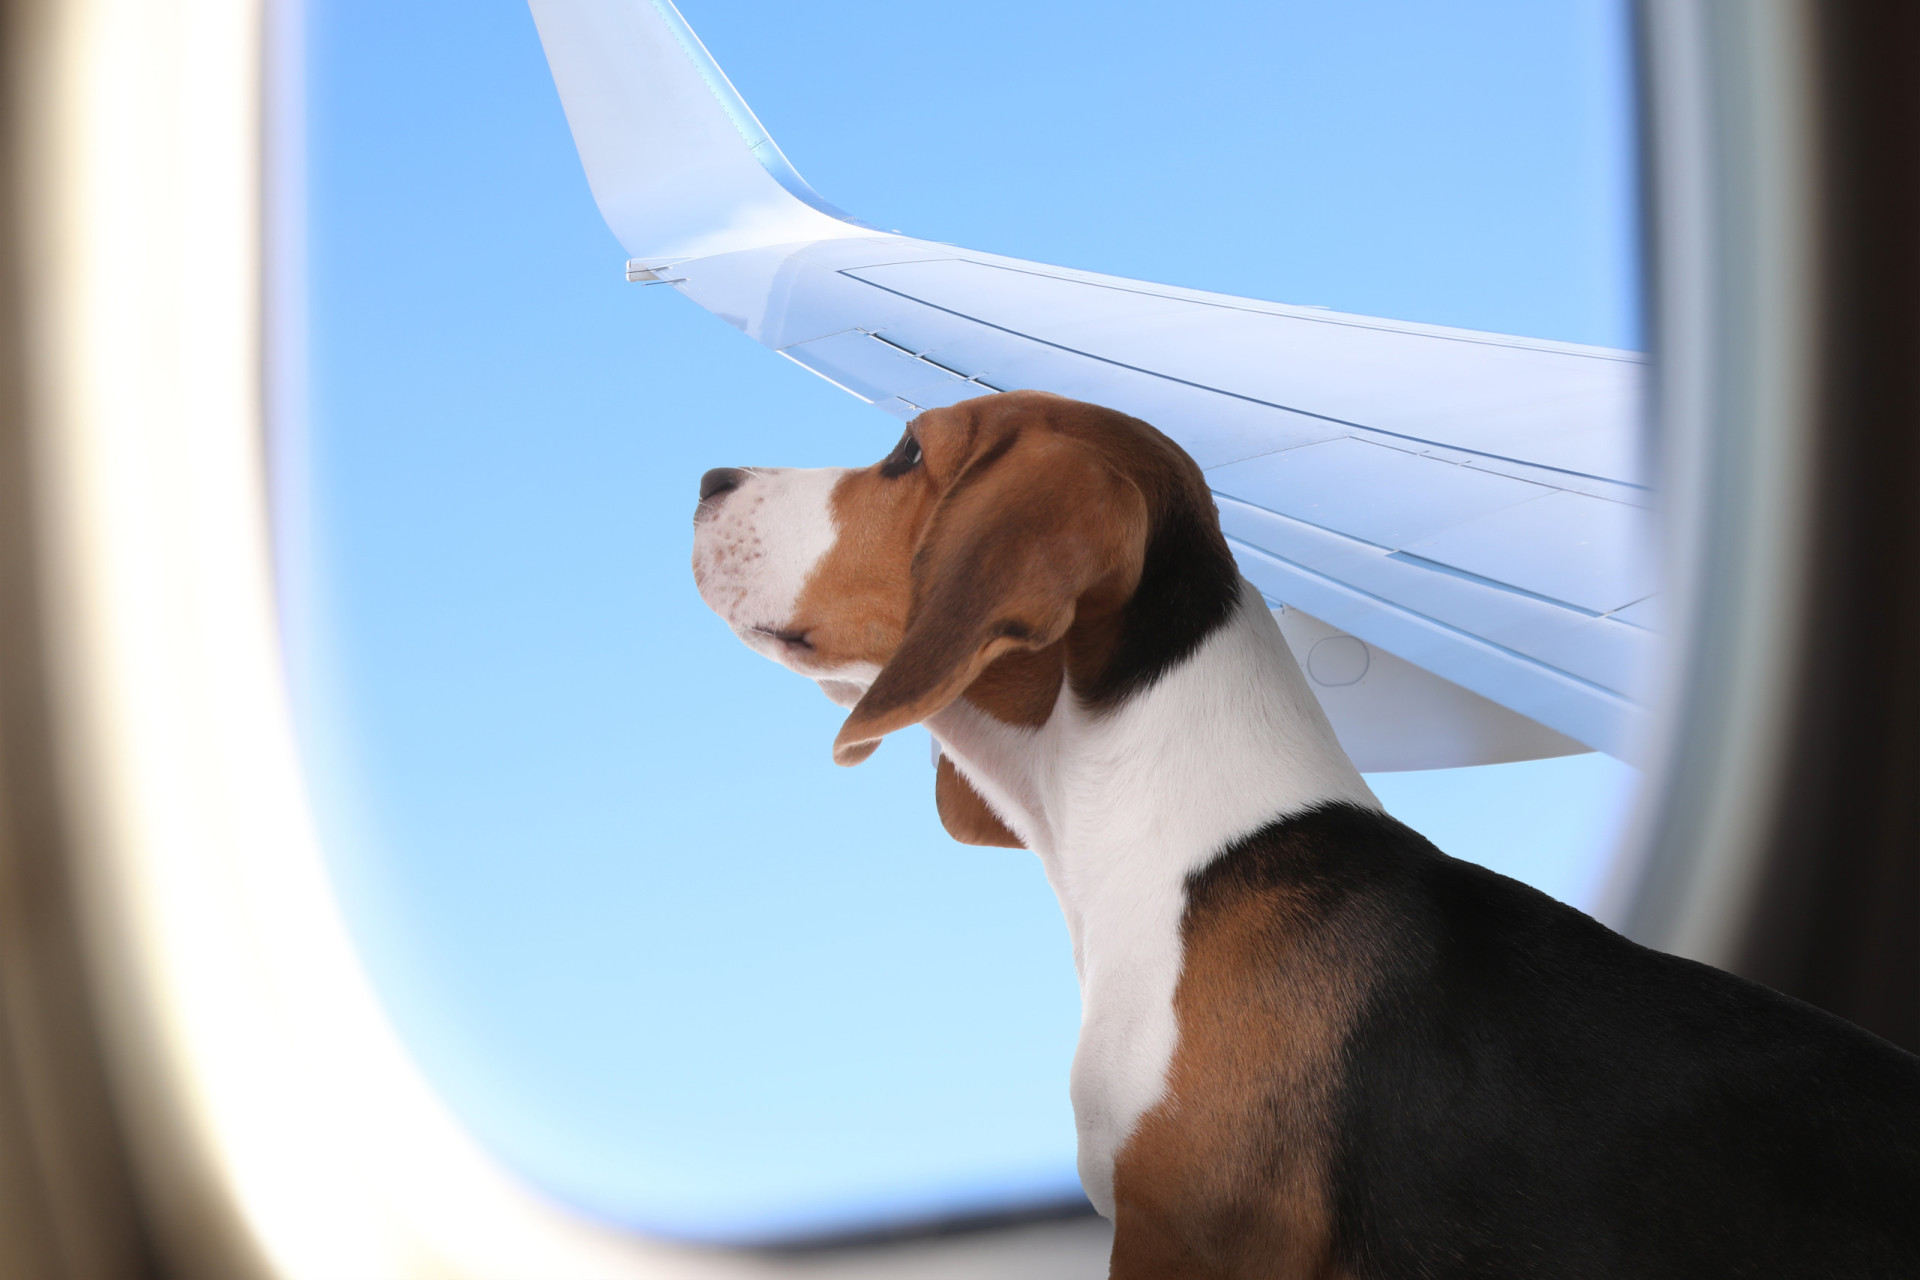 <p>During these Bark flights, canine passengers can socialize with each other and, like their owners, receive treats, ear protectors to reduce noise, and are entitled to a drink of their choice, among other surprises.</p><p><a href="https://www.msn.com/en-us/community/channel/vid-7xx8mnucu55yw63we9va2gwr7uihbxwc68fxqp25x6tg4ftibpra?cvid=94631541bc0f4f89bfd59158d696ad7e">Follow us and access great exclusive content every day</a></p>